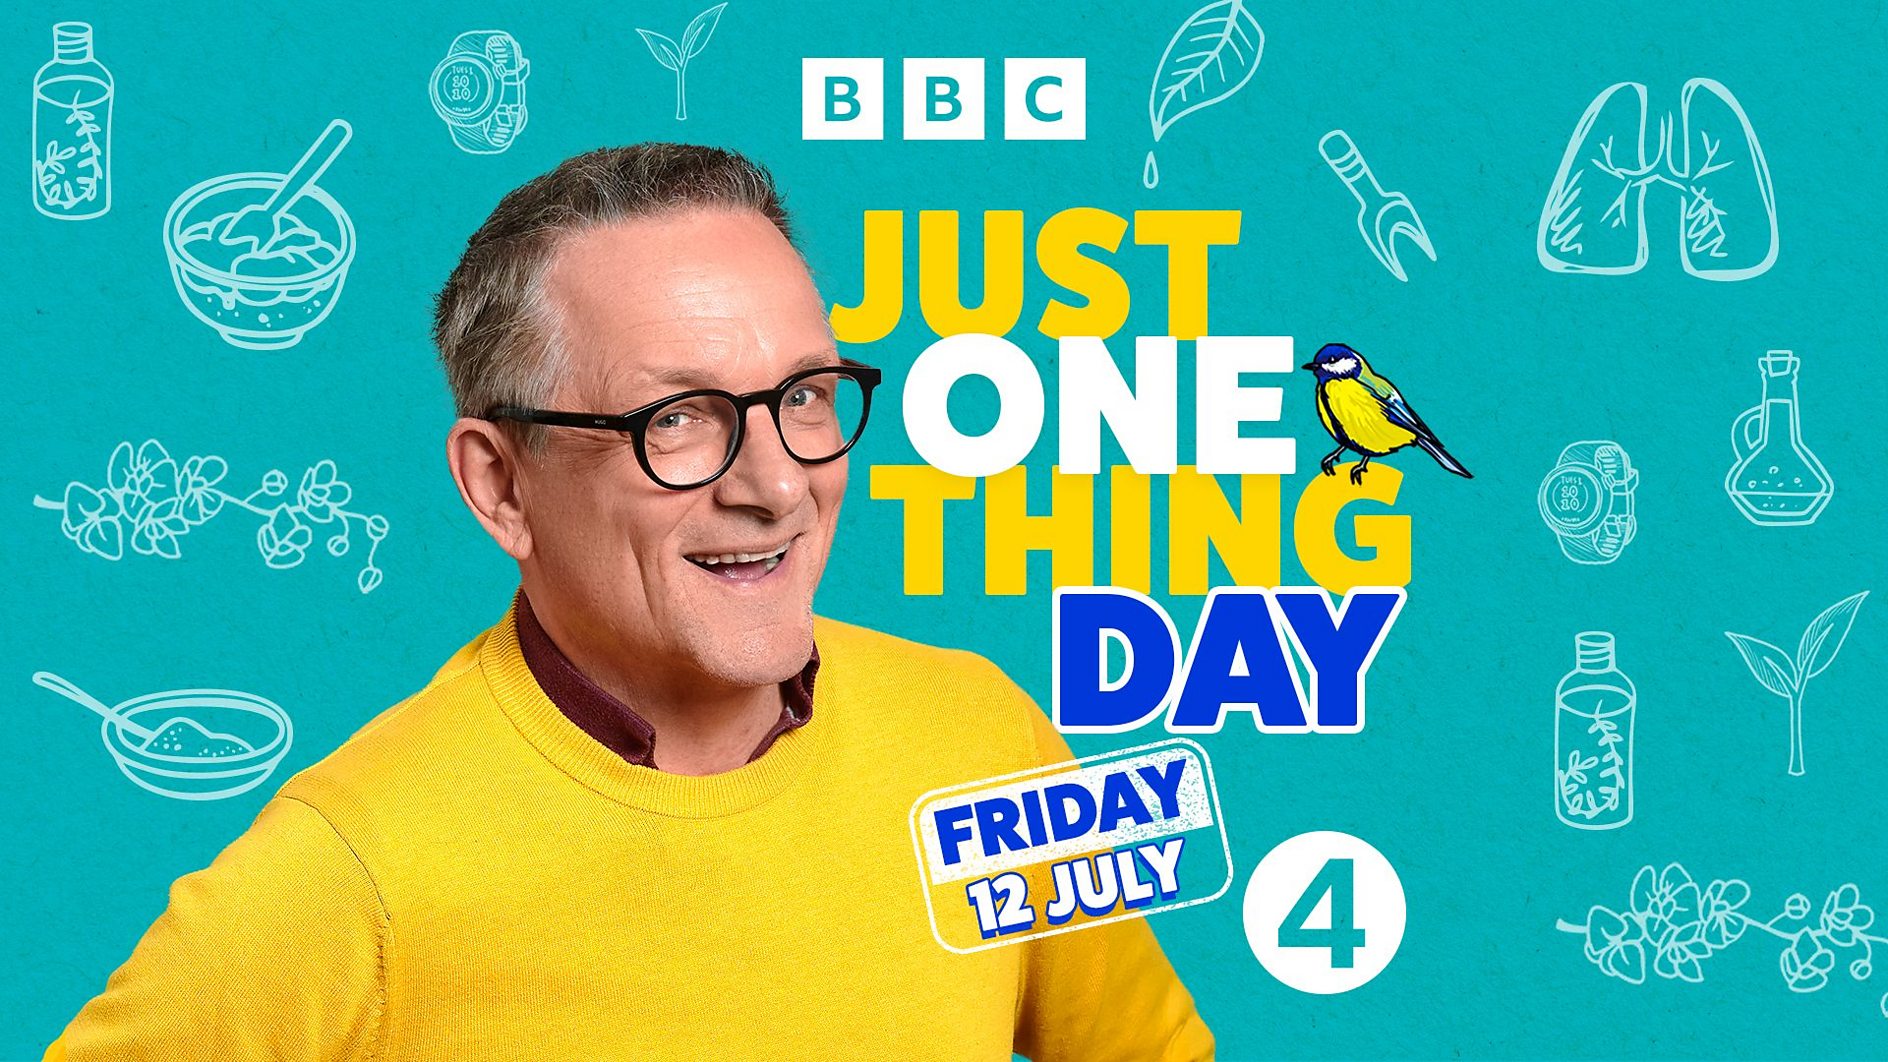 BBC pays tribute to Michael Mosley with Just One Thing Day across Radio and TV